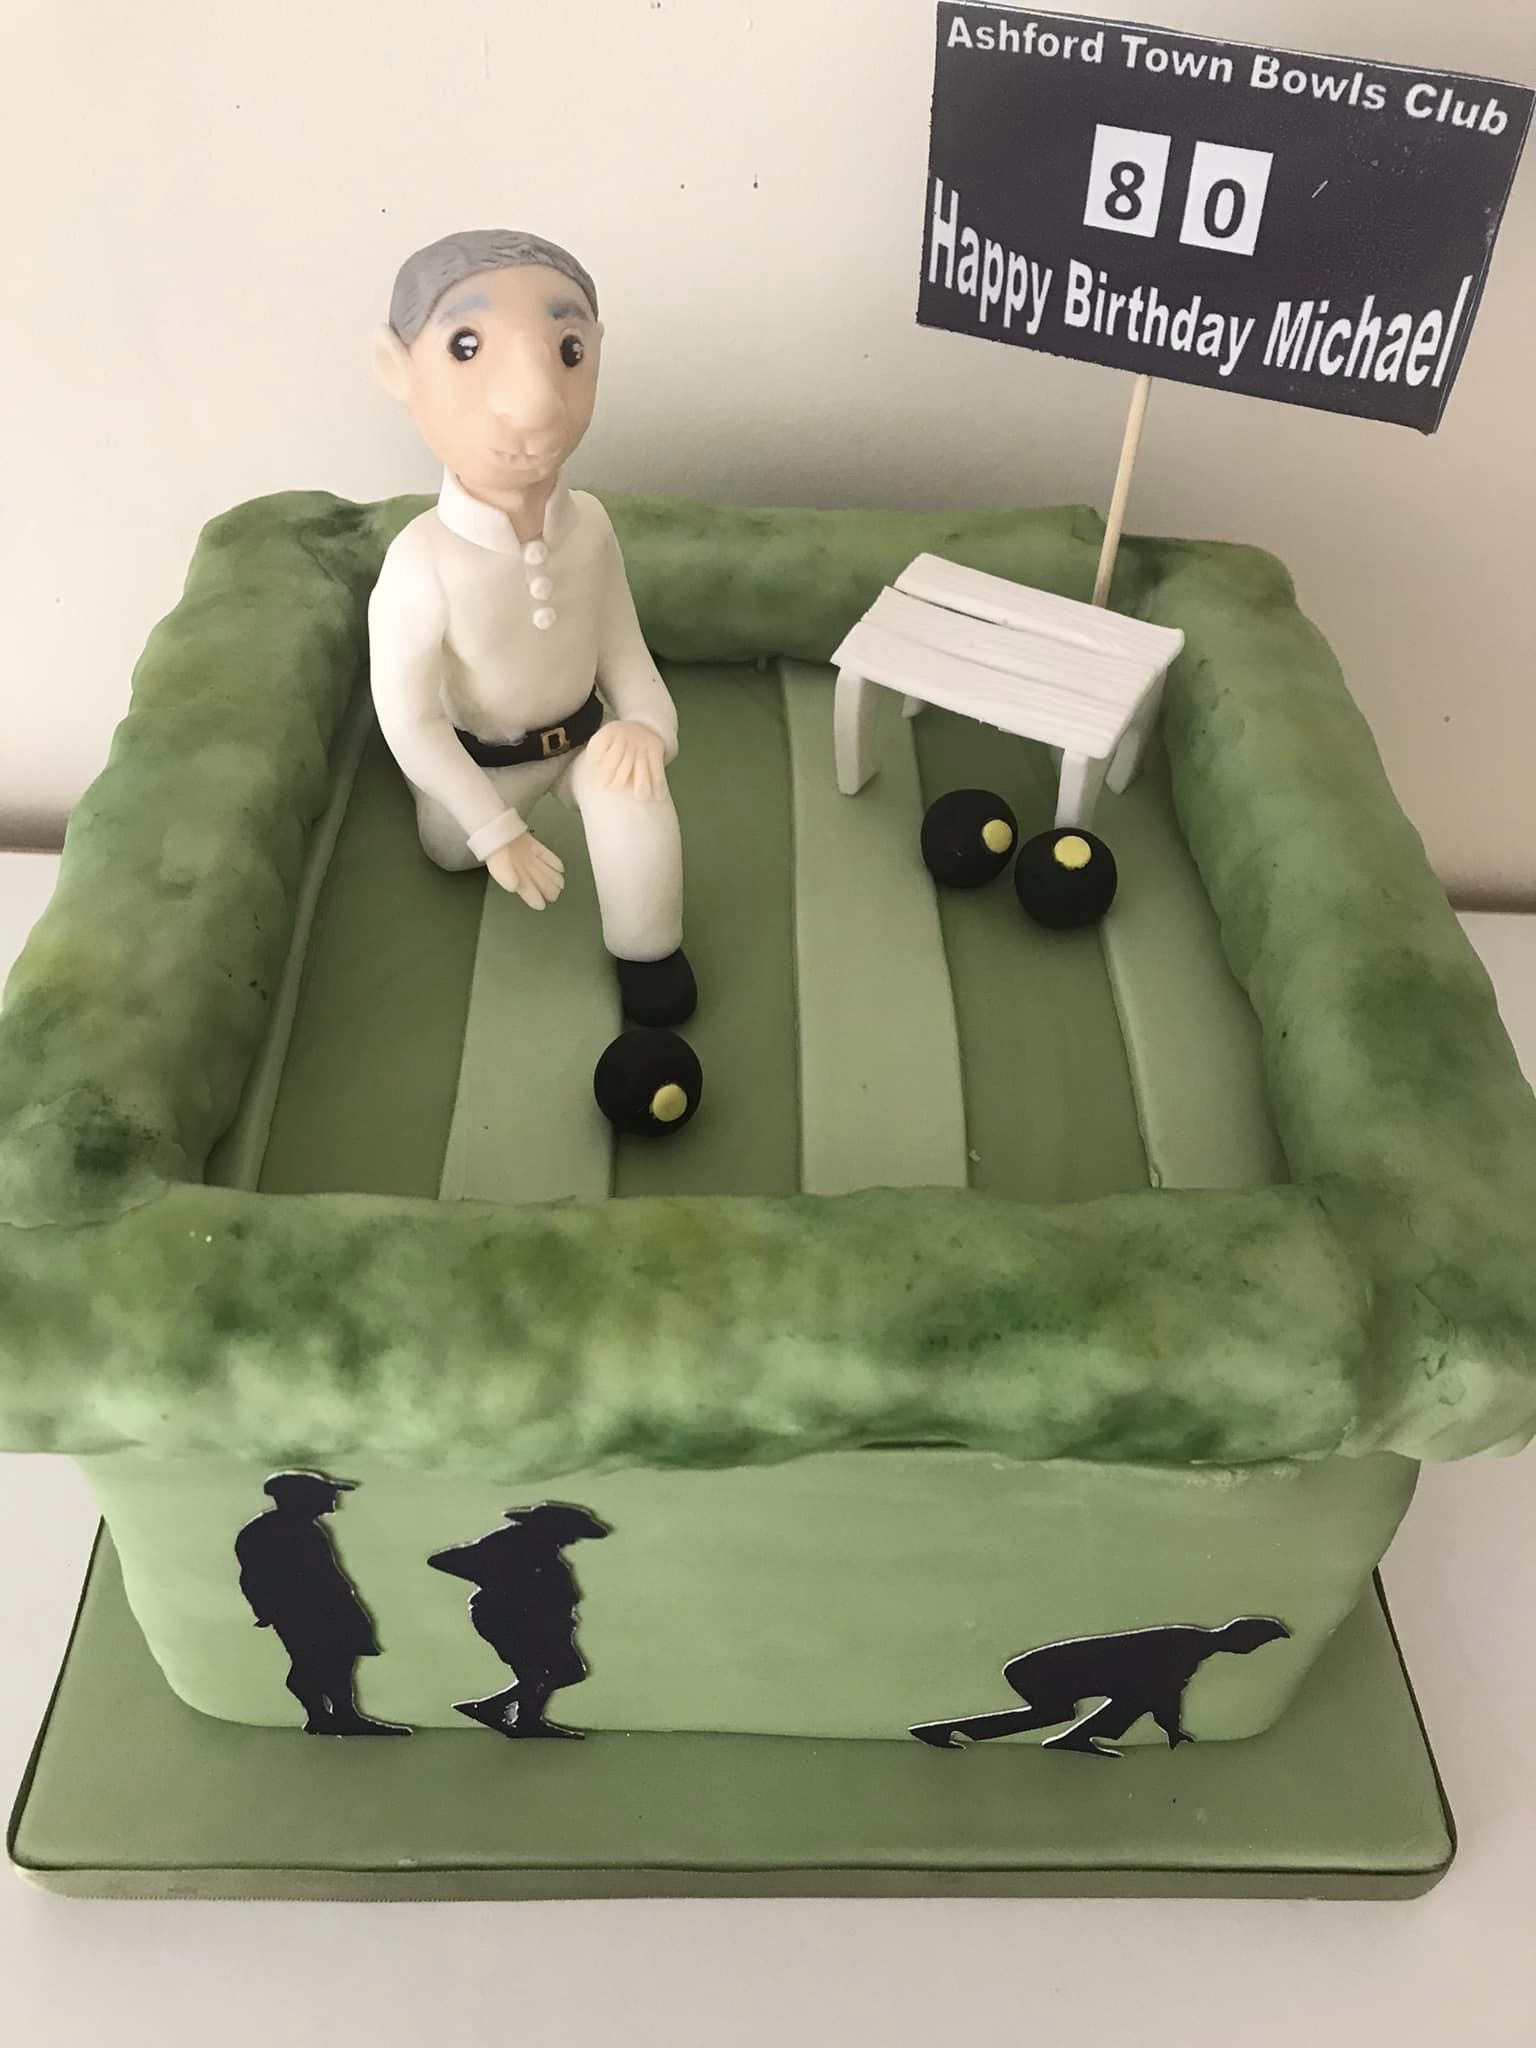 cake sculptures of a man on a ashford town bowls club green wearing white and kneeling